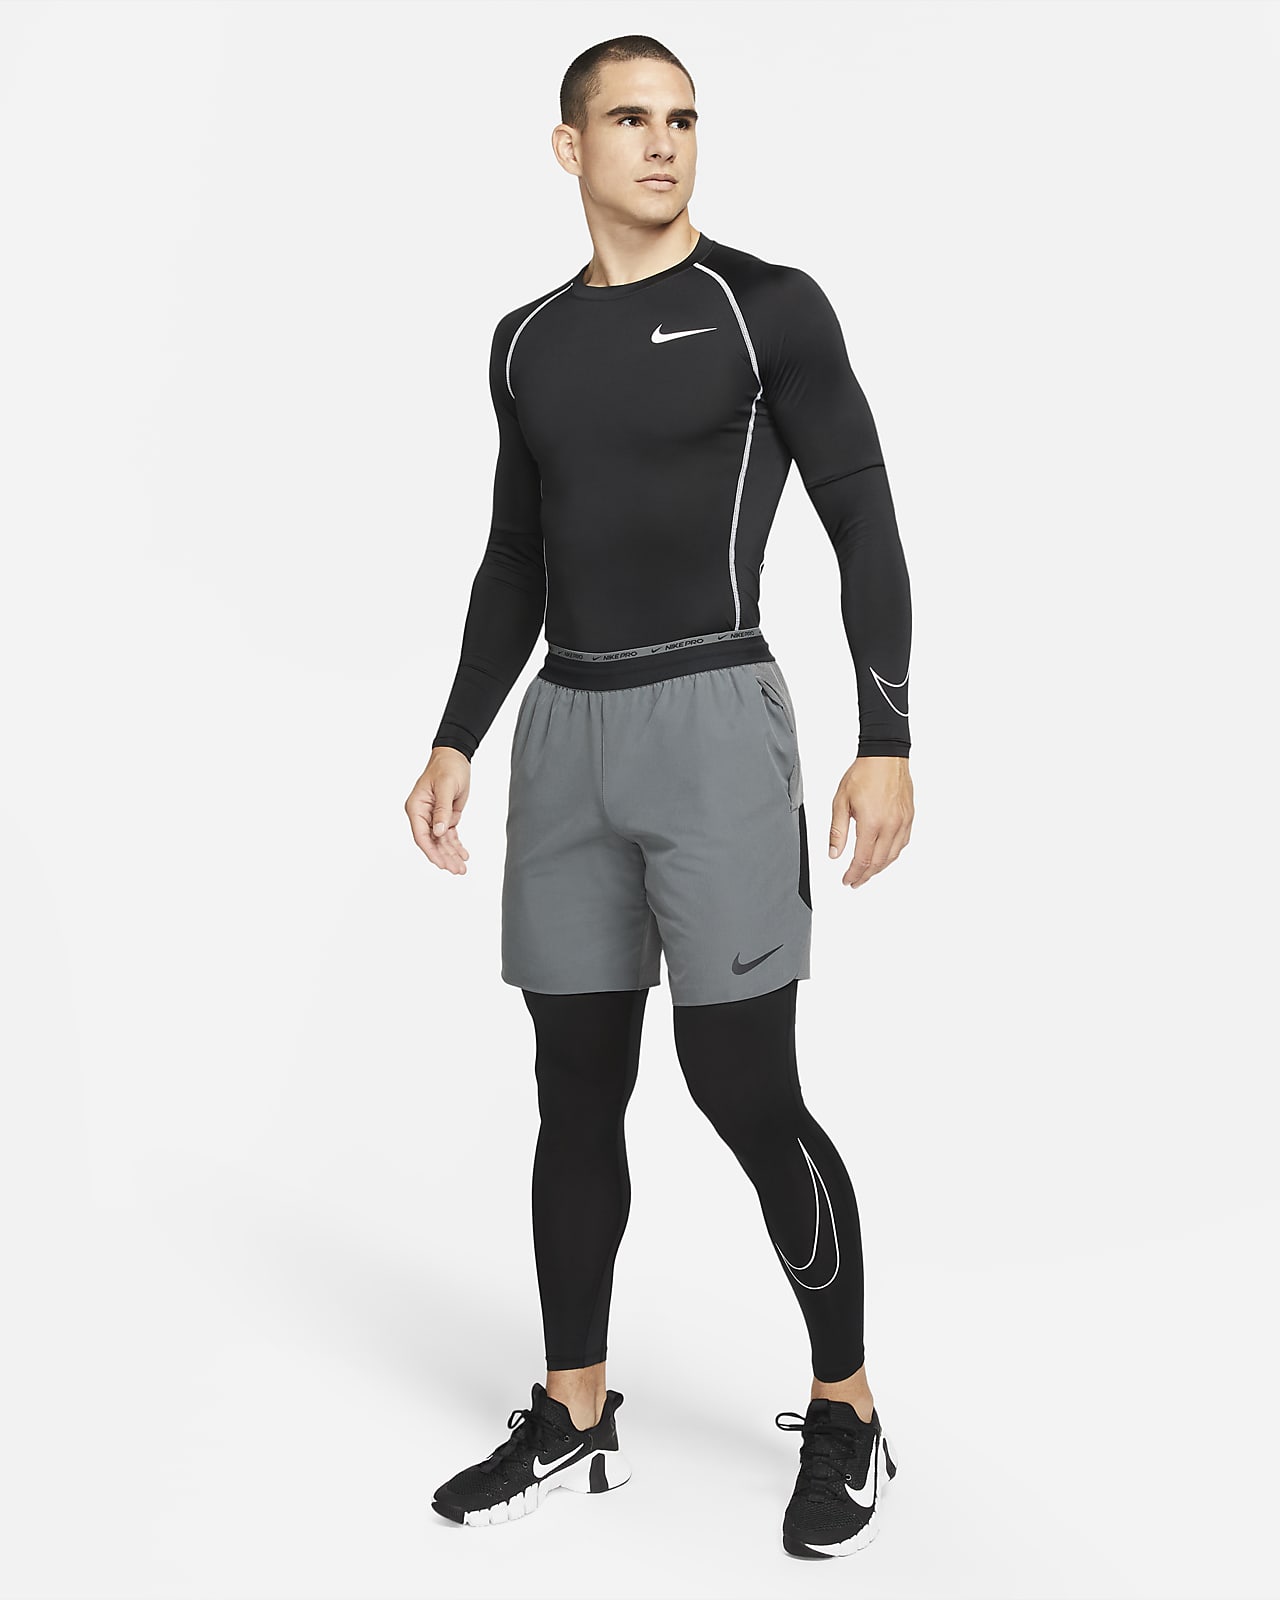 $140 Nike Pro Hyper Recovery Compression Tights Men's Size Medium-Tall NWT  Black